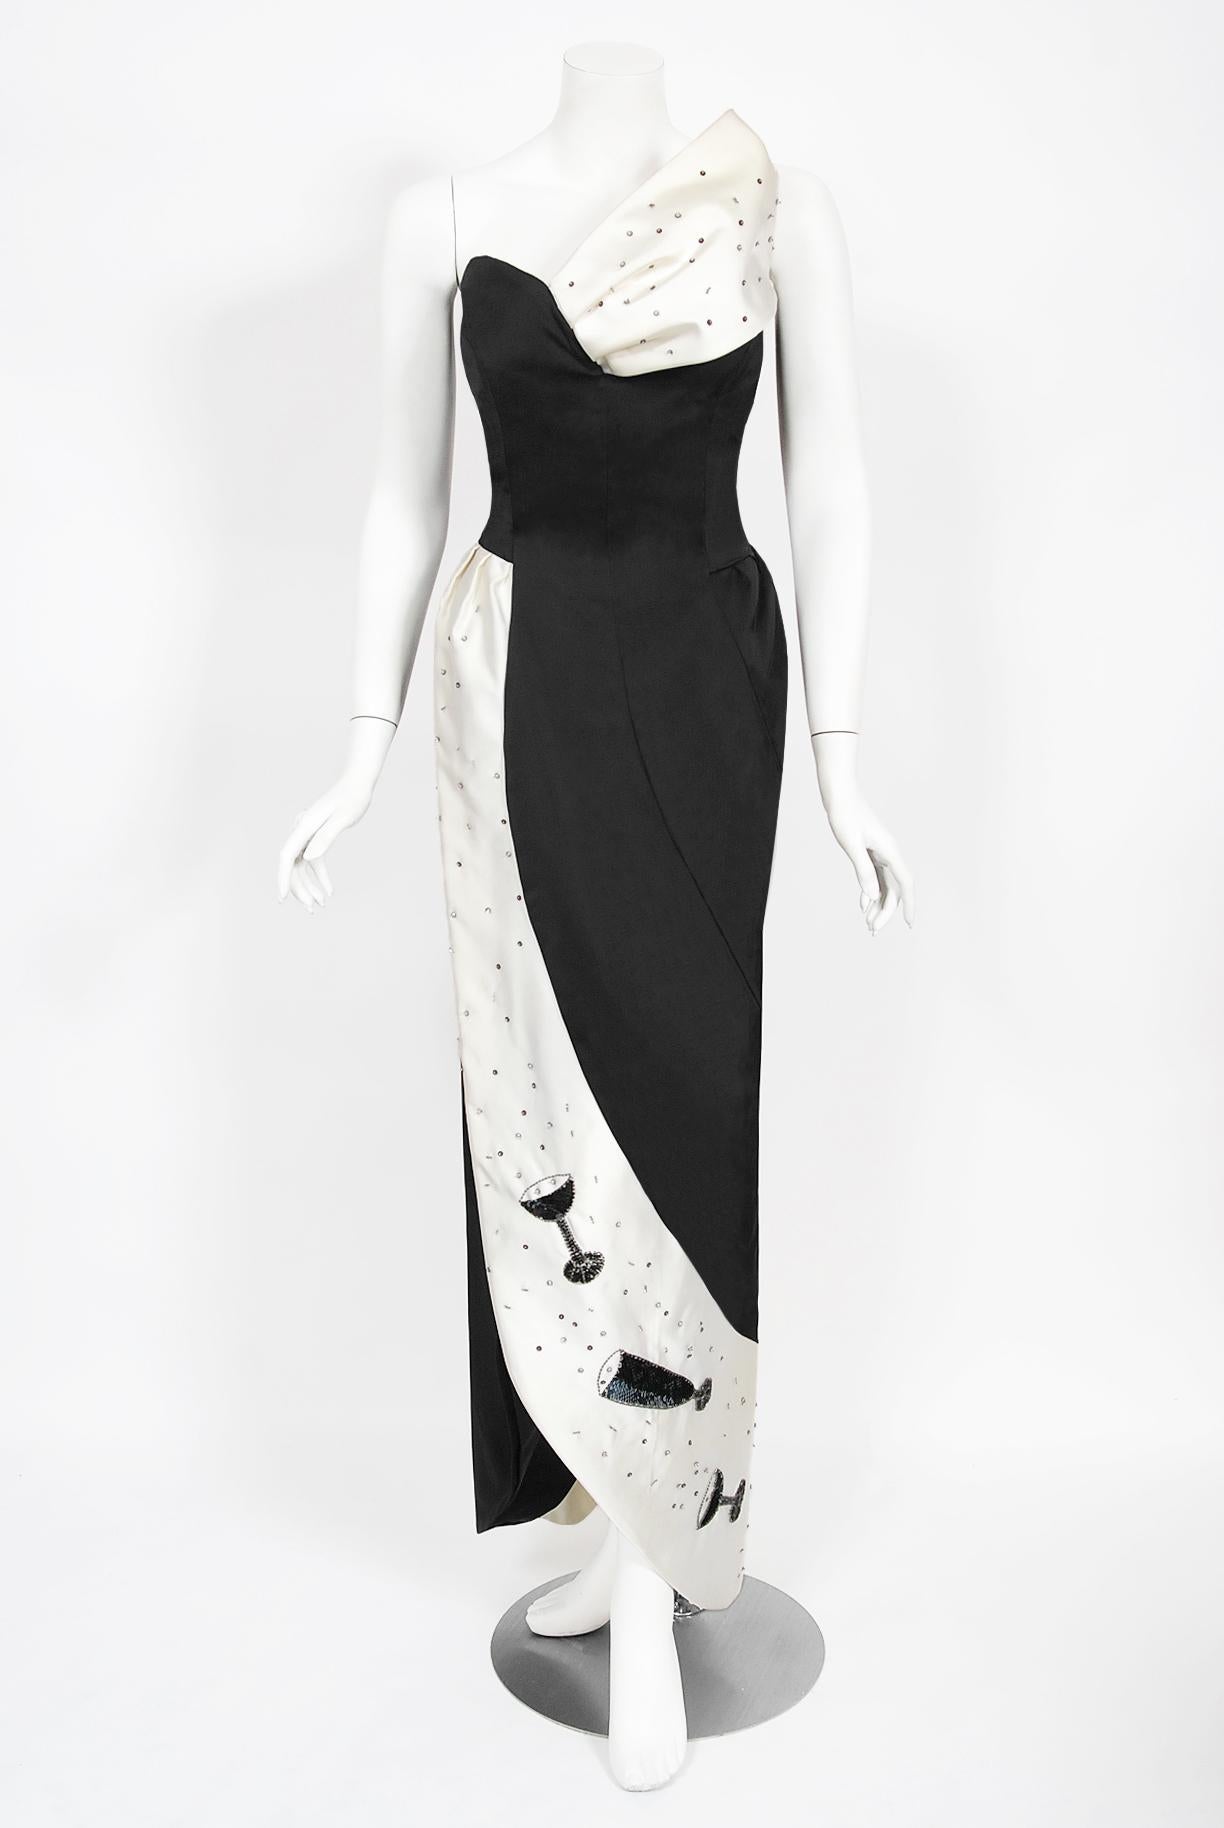 A whimsical and totally unique 'champagne flutes and sequined bubbles' novelty black and white satin gown by Tan Giudicelli of Paris. He was known for his surrealist approach to fashion and this dress is no exception. The elegant strapless bodice